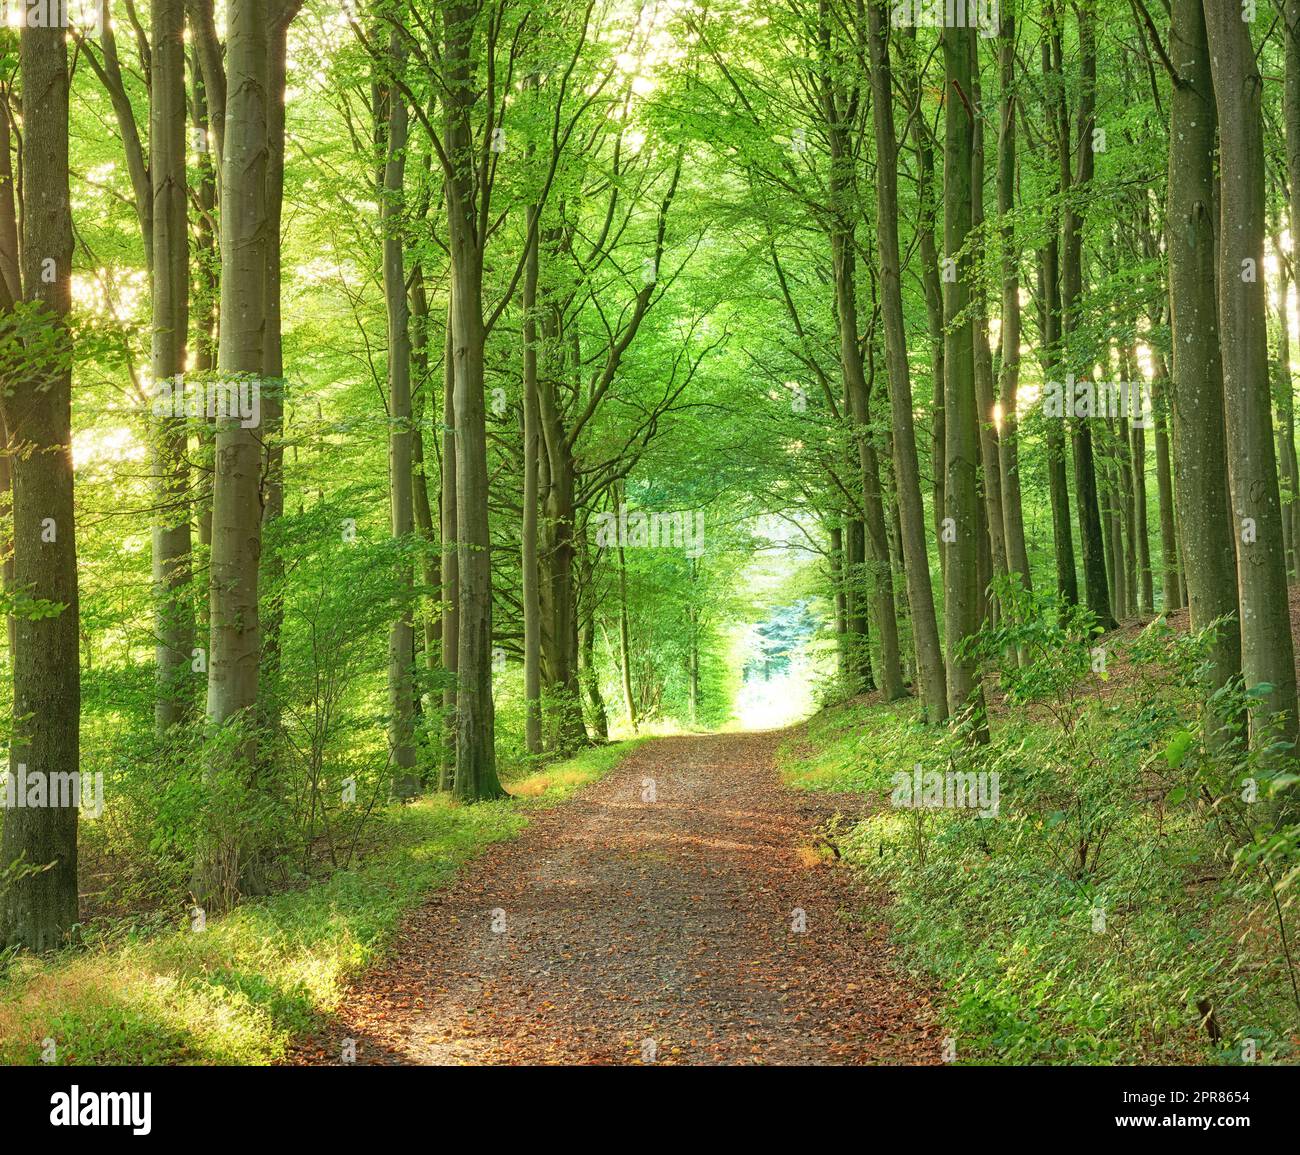 A lush green endless forest in the woodlands on a summer day. Outdoor trail in nature with an opening with a bright light. Beautiful landscape with shining sunlight at the beginning of the path Stock Photo